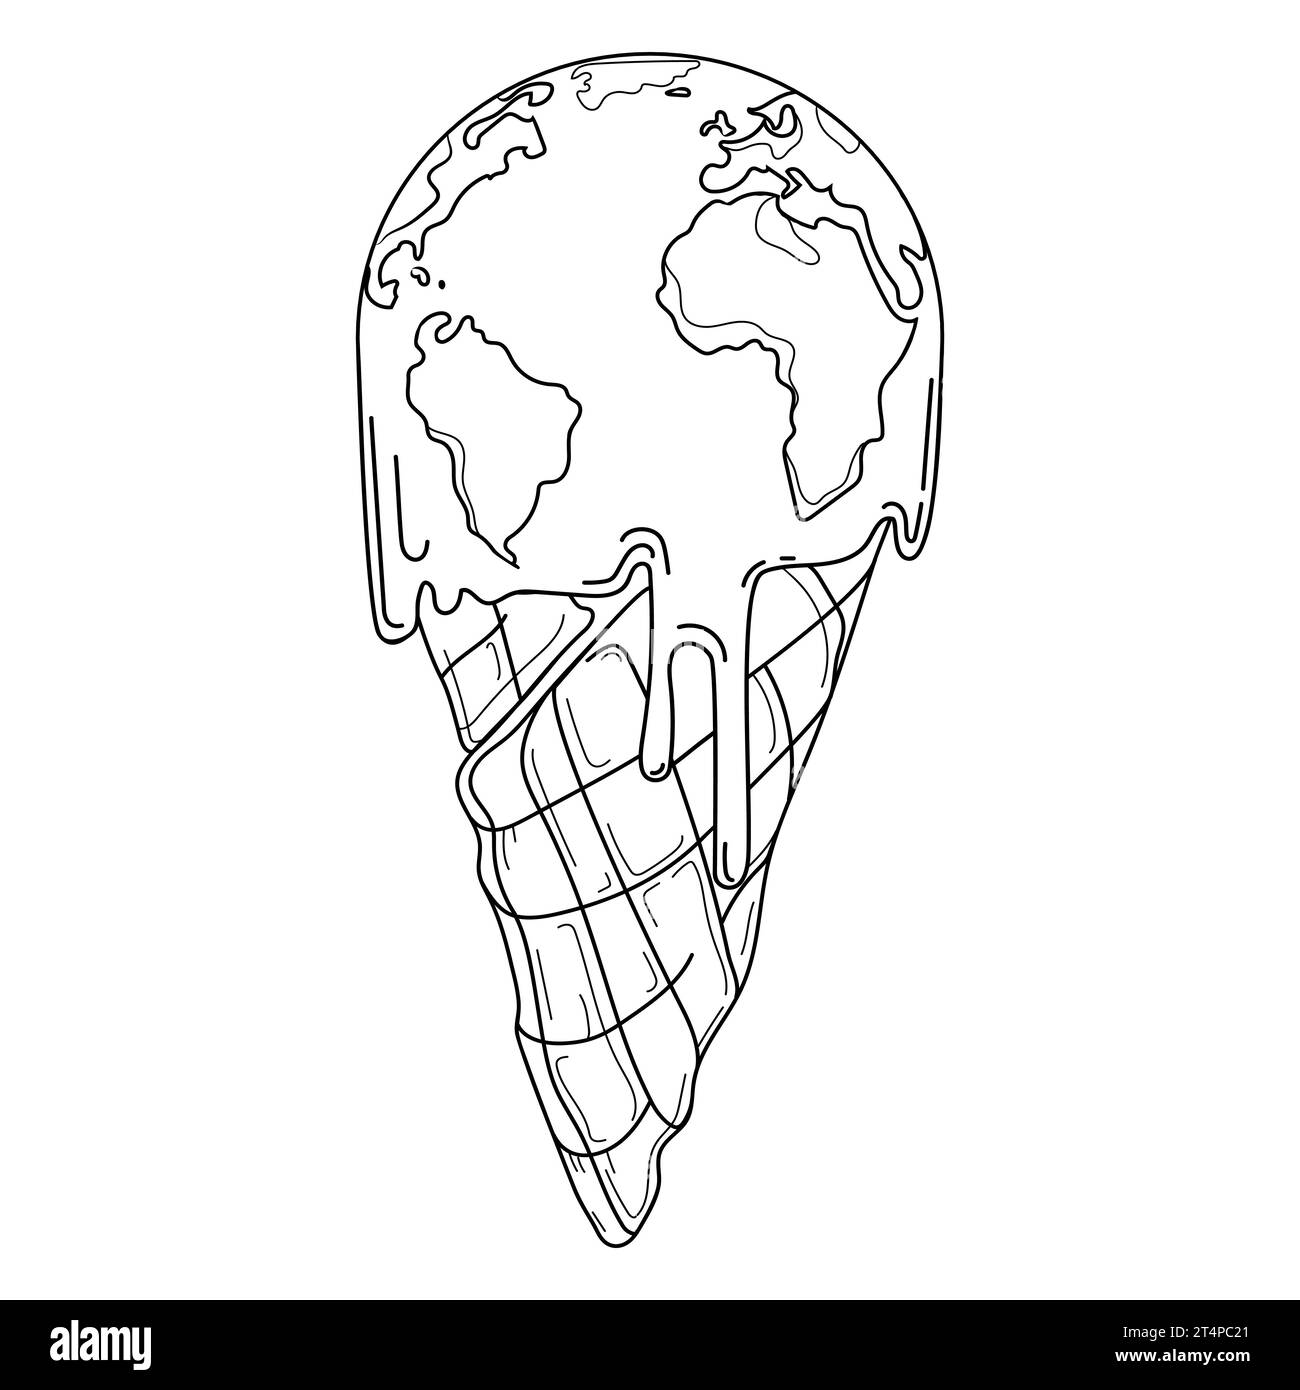 Climate change and global warming concept. Planet Earth in a waffle cone is melting like ice cream due to global warming and atmospheric pollution. Stock Vector